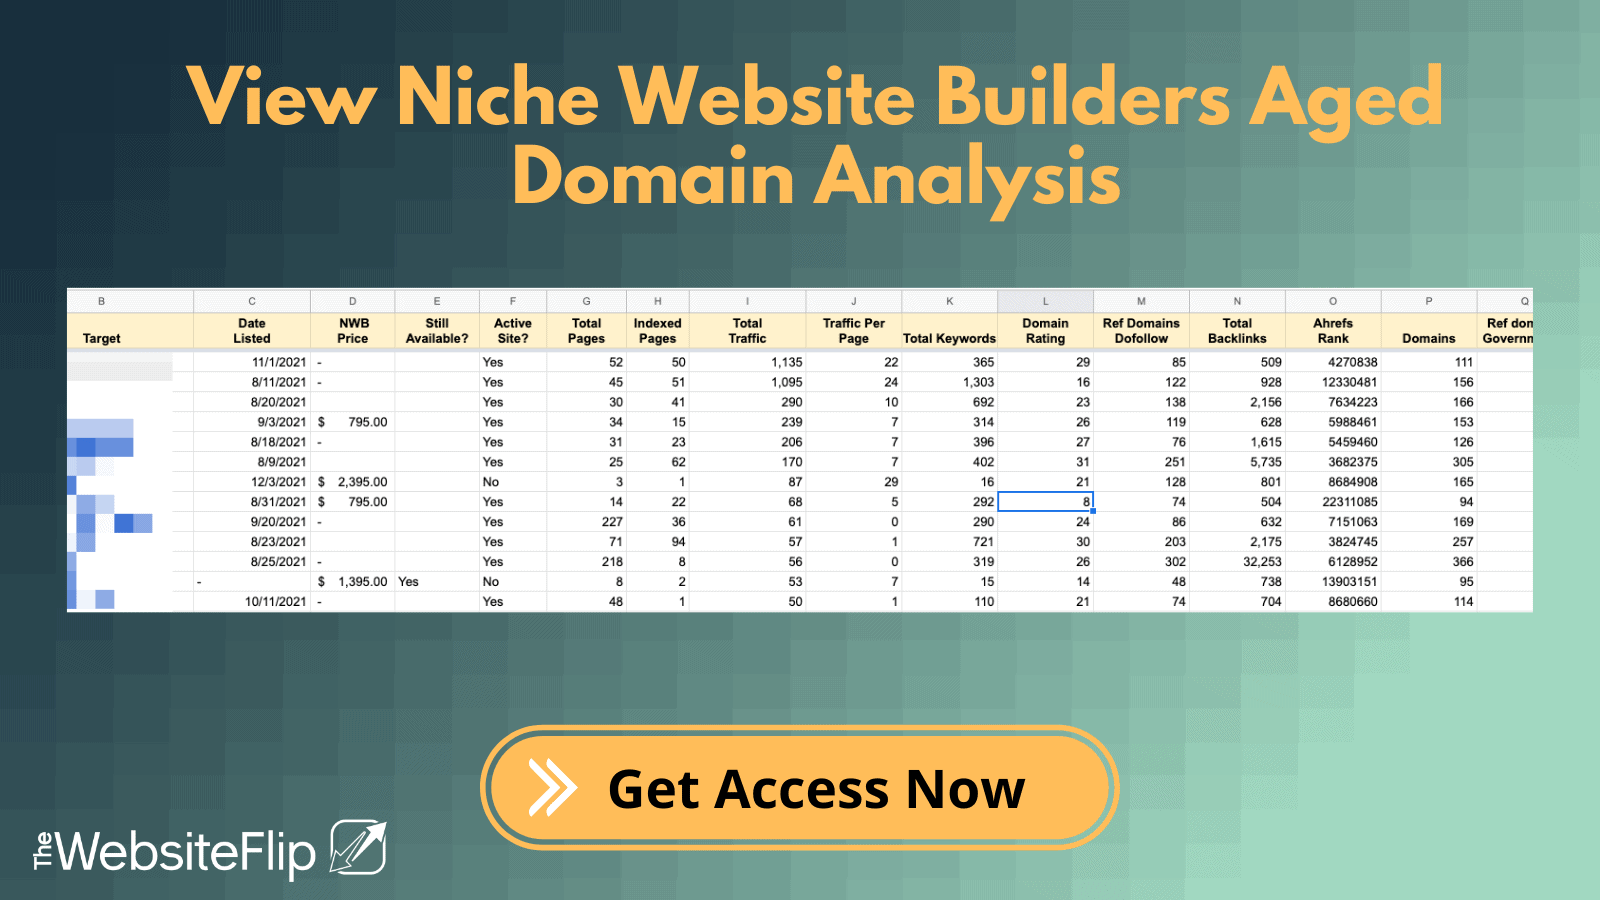 View Niche Website Builders Aged Domain Analysis